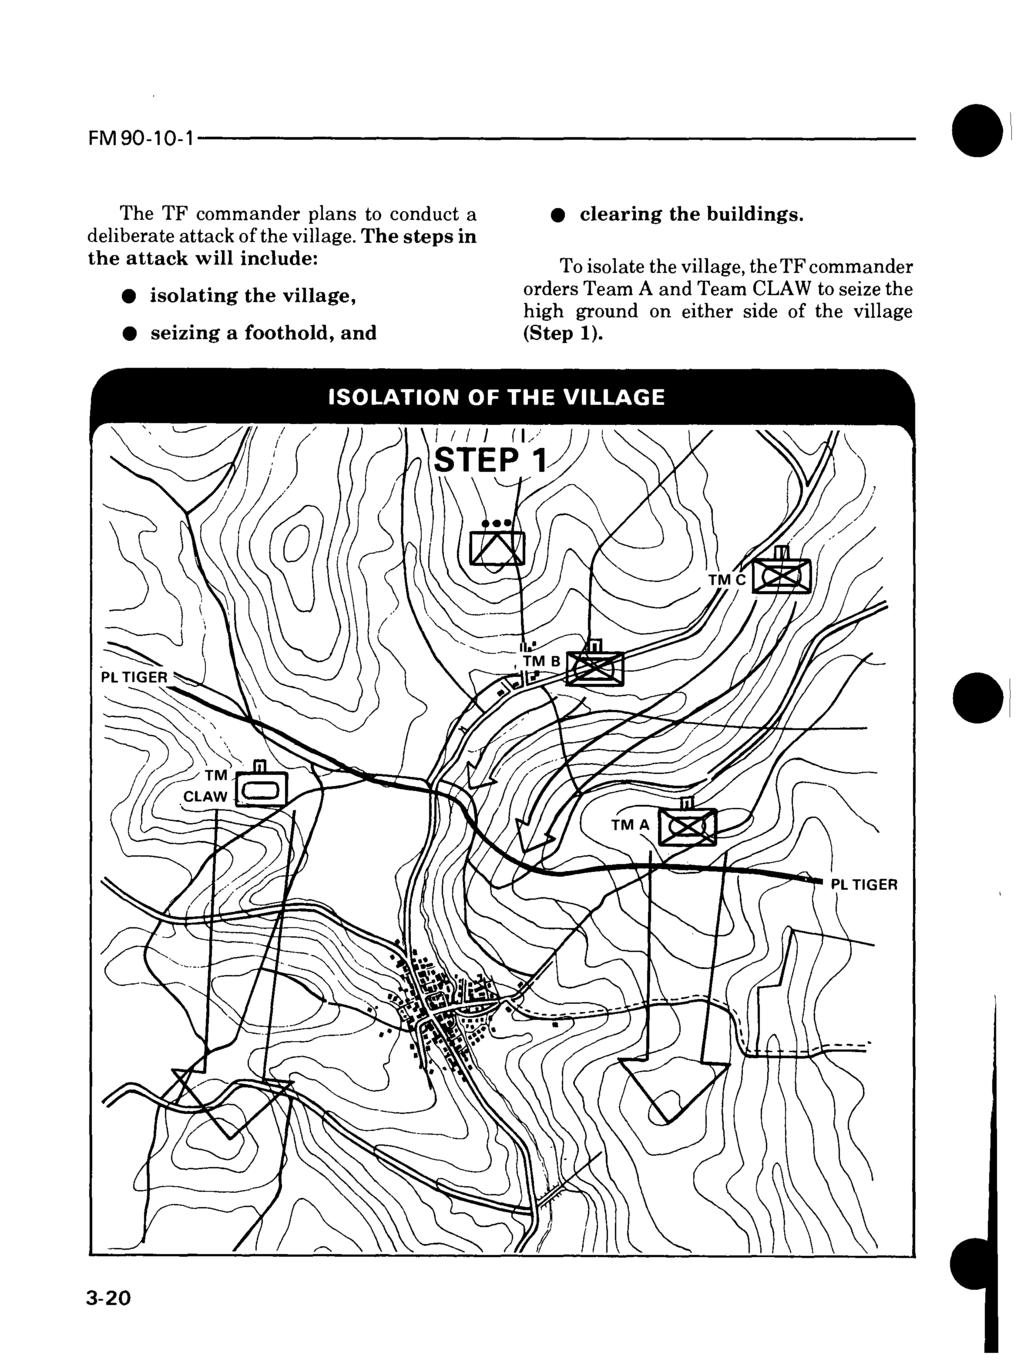 The TF commander plans to conduct a deliberate attack of the village. The steps in the attack will include: isolating the village, seizing a foothold, and clearing the buildings.